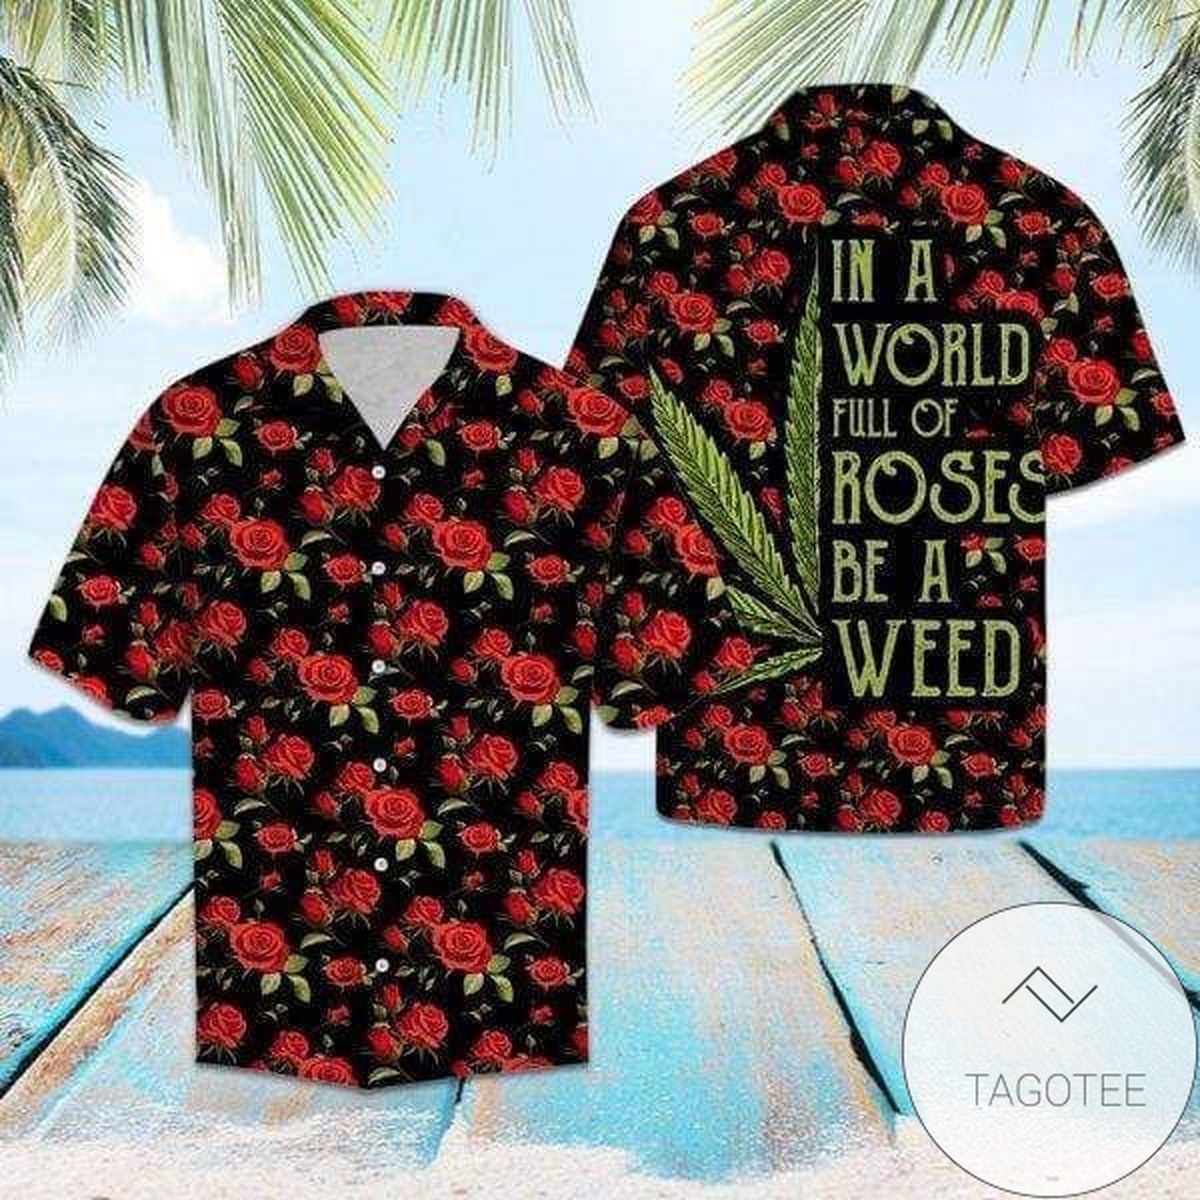 Find In A World Full Of Roses Be A Weed Hawaiian Aloha Shirts